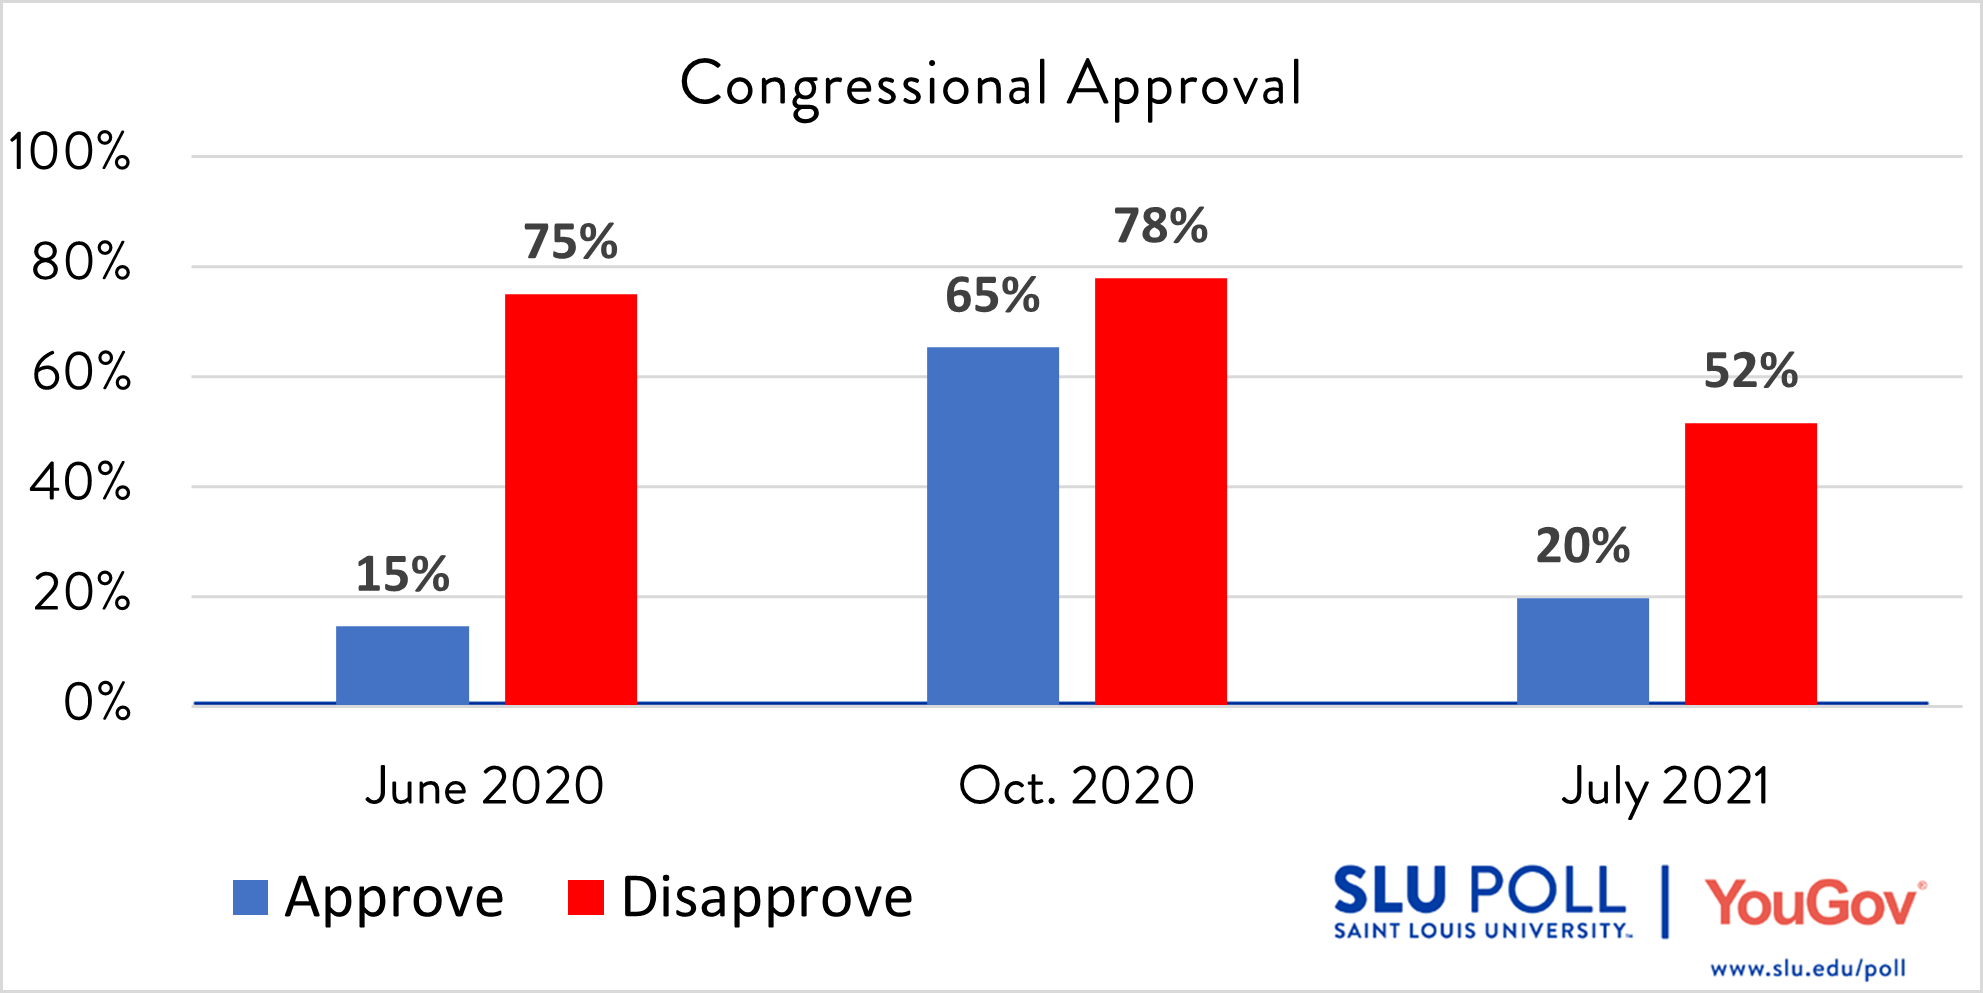 Do you approve or disapprove of the way each is doing their job… The US Congress?  - Strongly Approve: 2% - Approve: 18% - Disapprove: 34% - Strongly Disapprove: 34%  - Not Sure: 12% Subsample Question: The sample size for this question is 476. The margin of error for the full results for the above question is ± 6.02%.